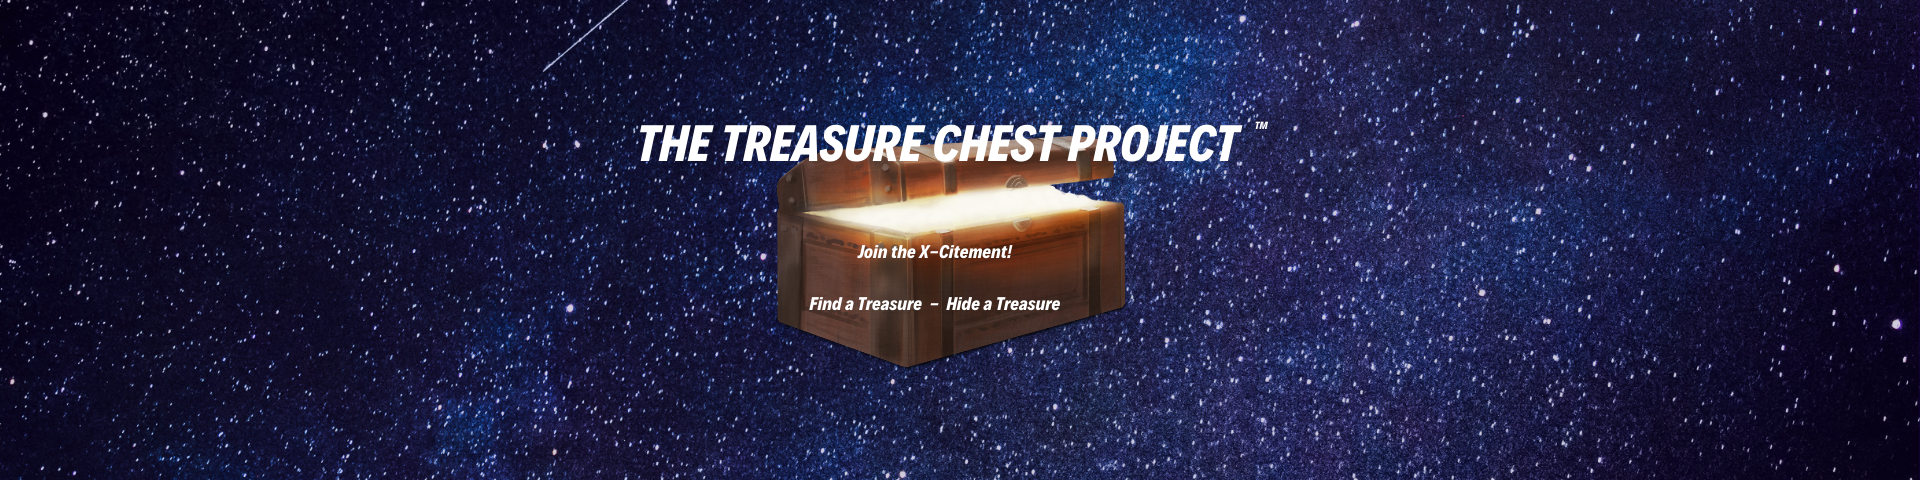 The First Hidden Treasure Chest of The Treasure Chest Project